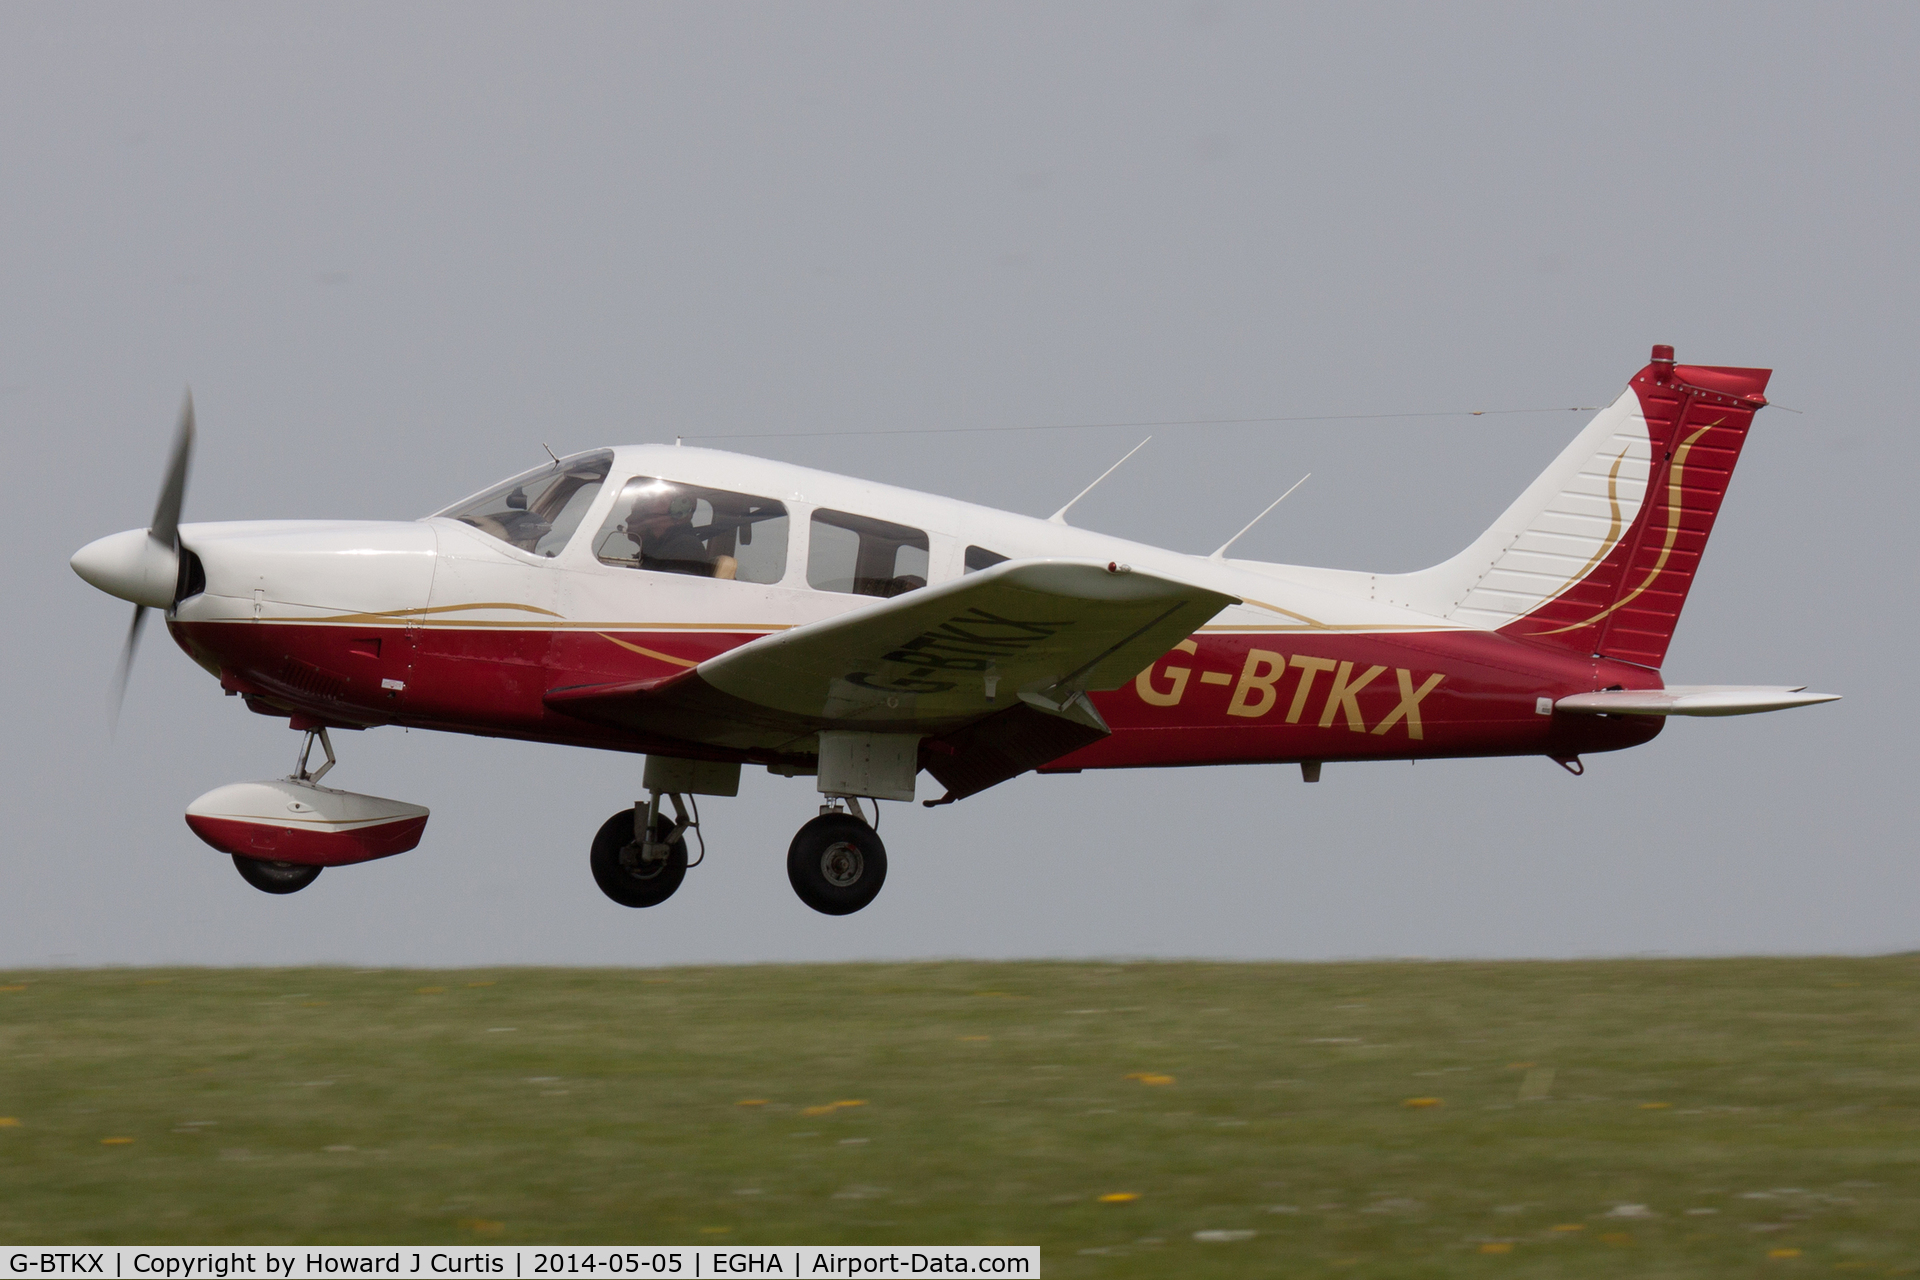 G-BTKX, 1978 Piper PA-28-181 Cherokee Archer II C/N 28-7890146, Privately owned